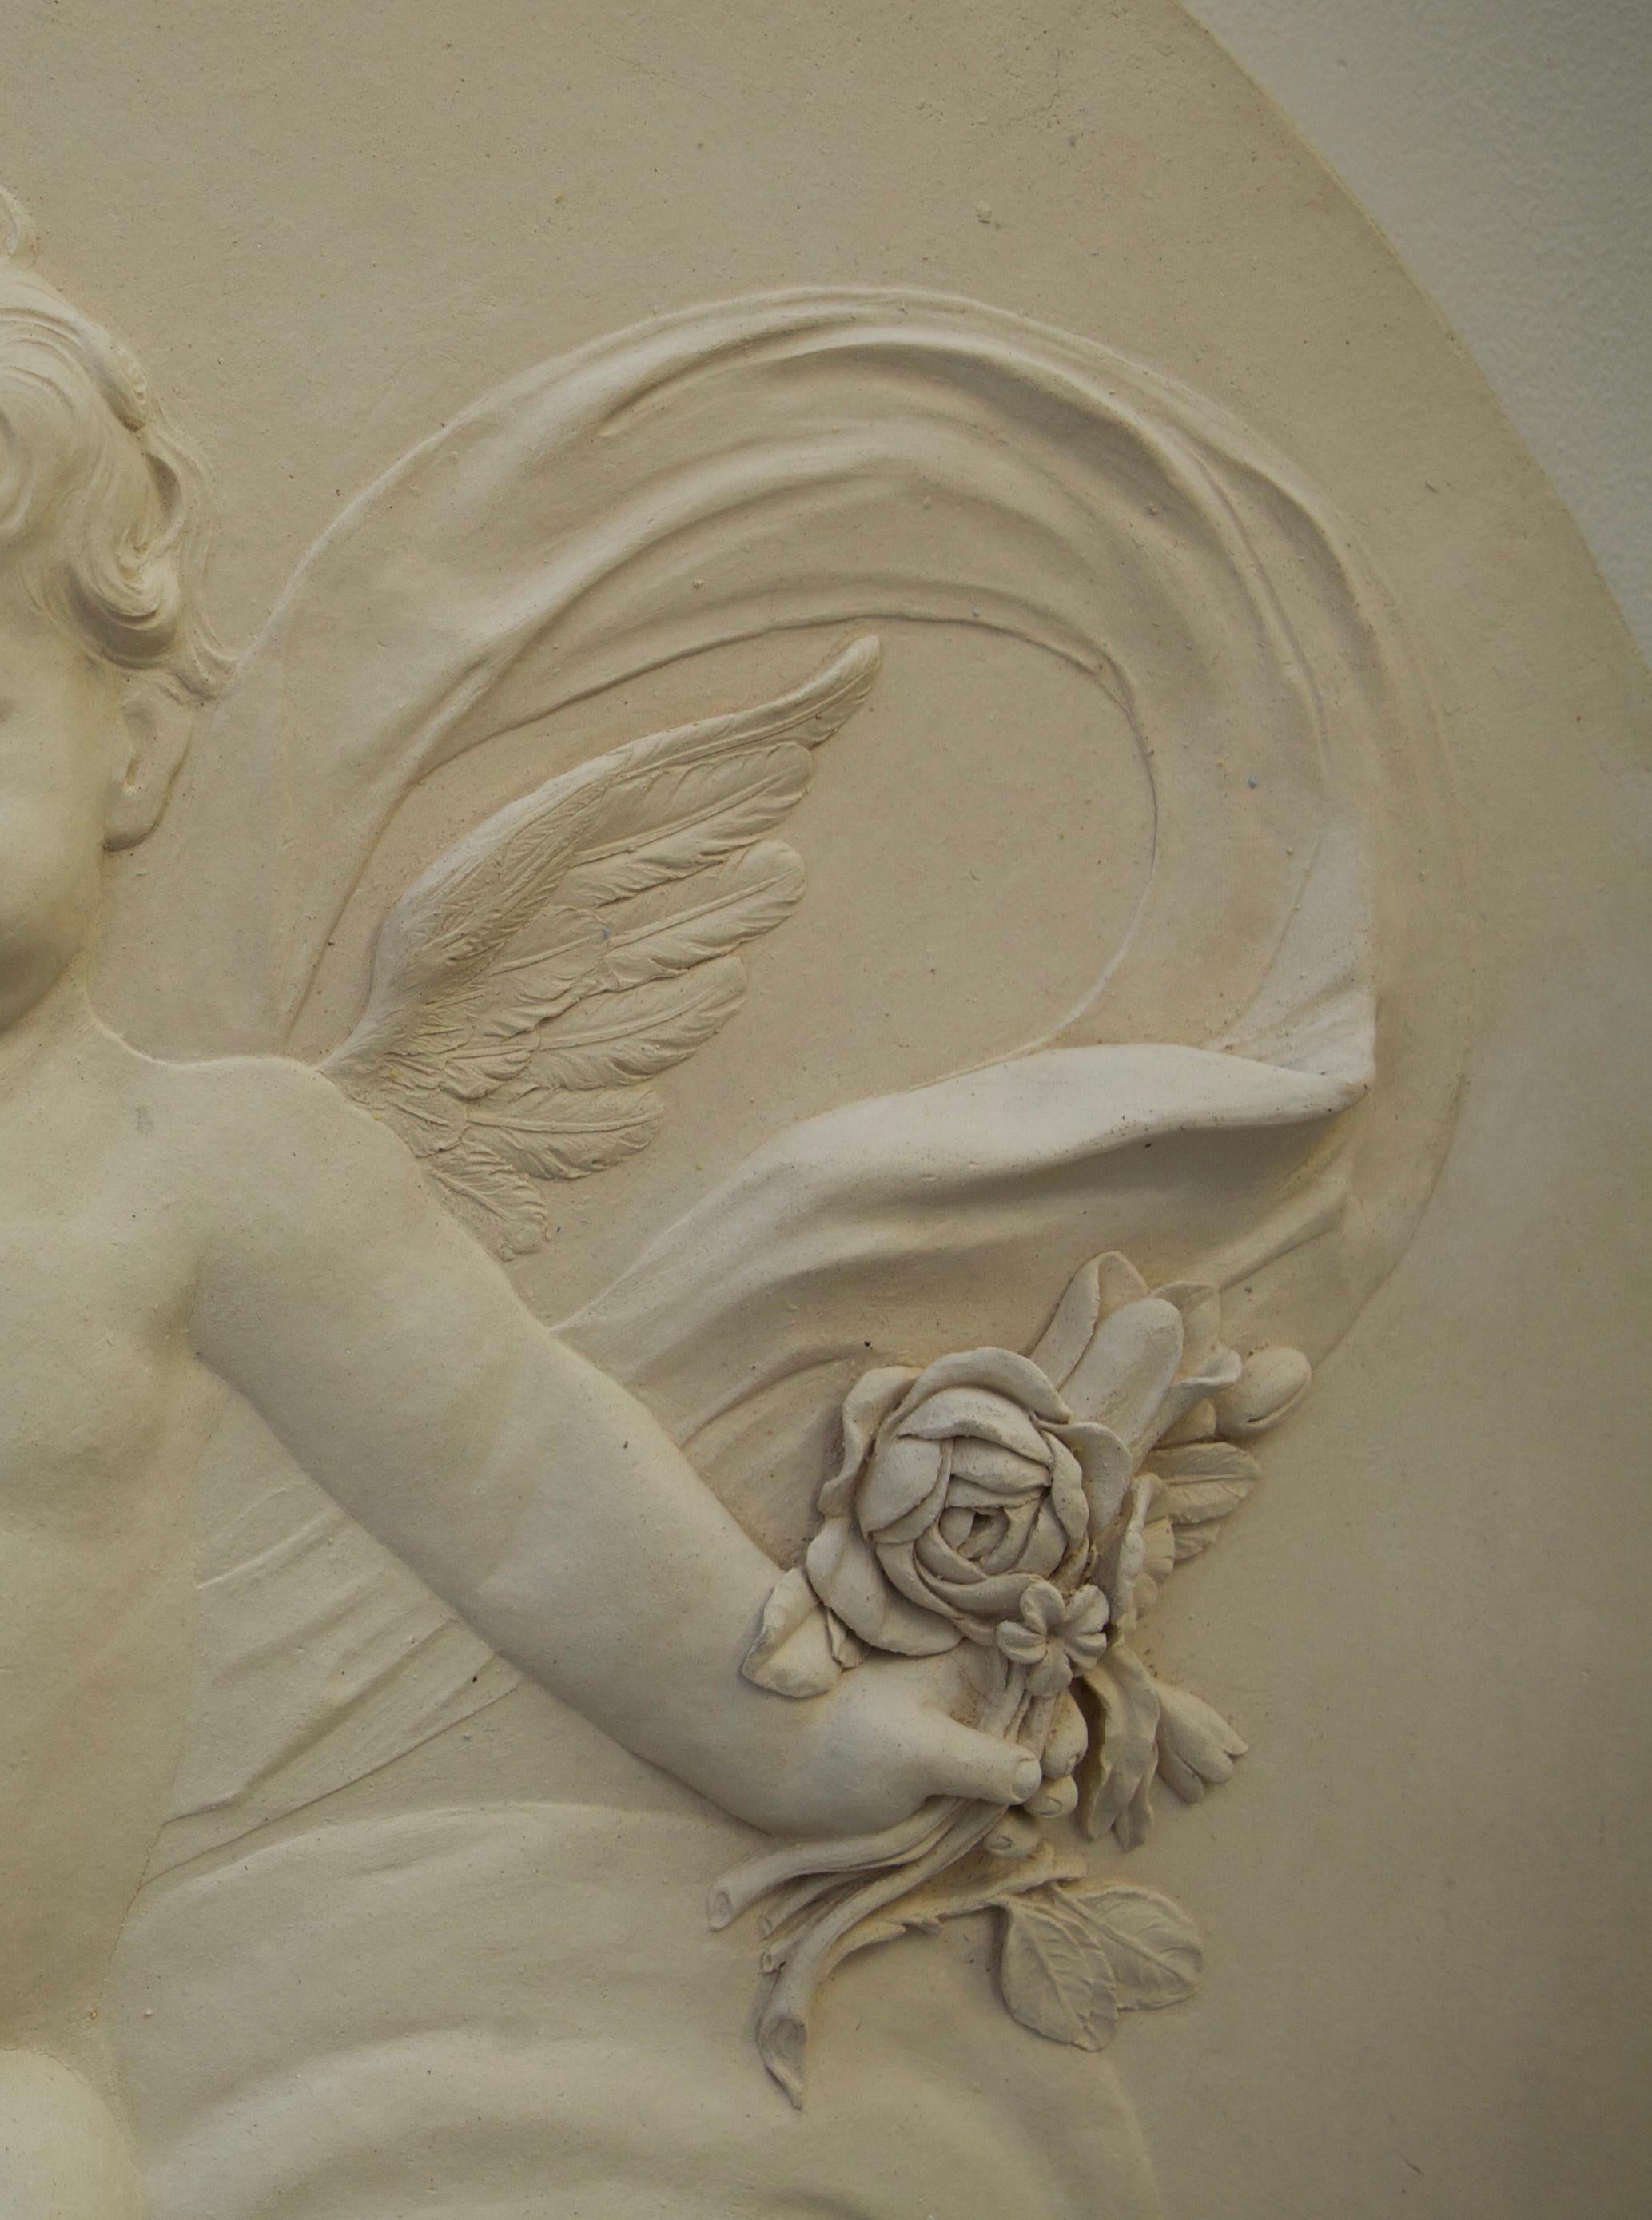 Plaster Roundel Depicting Spring from The Four Seasons Set - Beige Figurative Sculpture by Coade